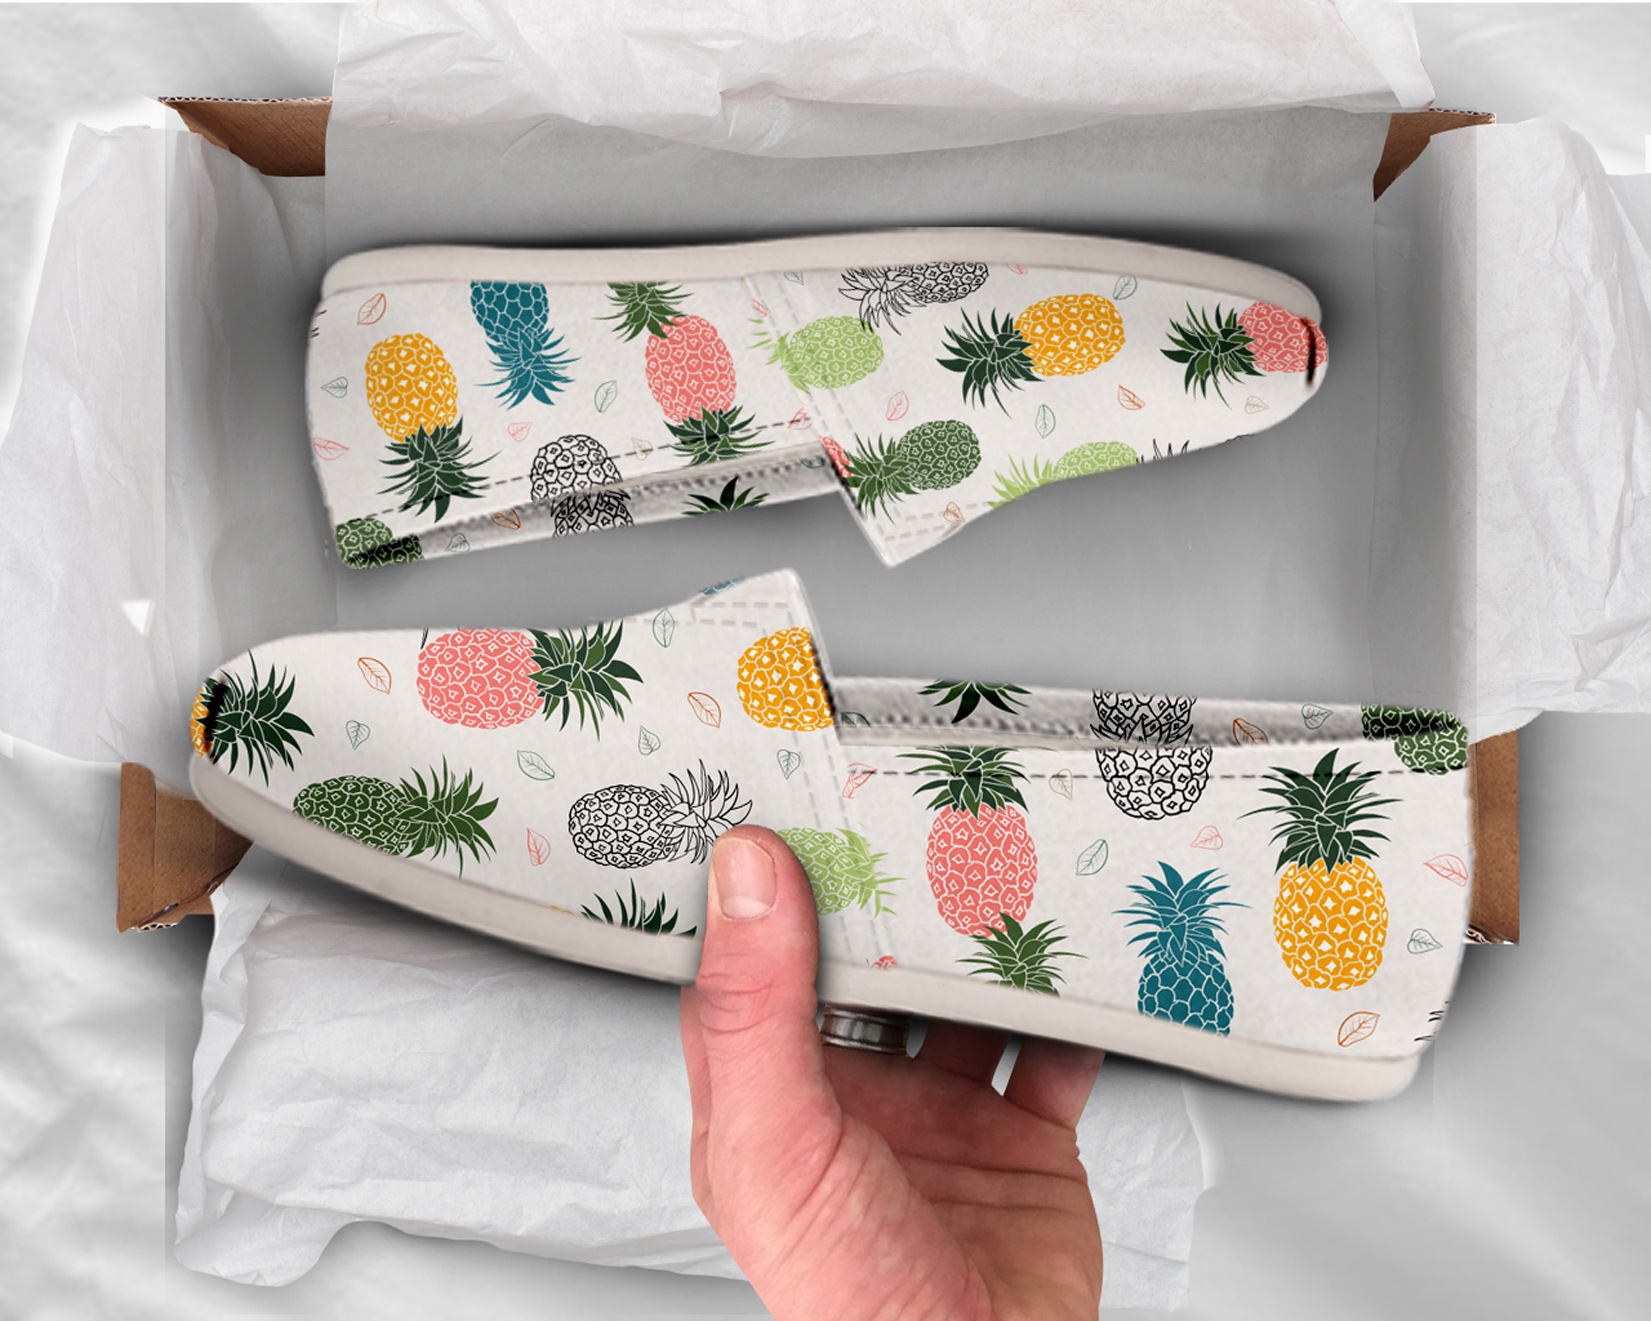 Cute Pineapple Shoes | Custom Canvas Sneakers For Kids & Adults